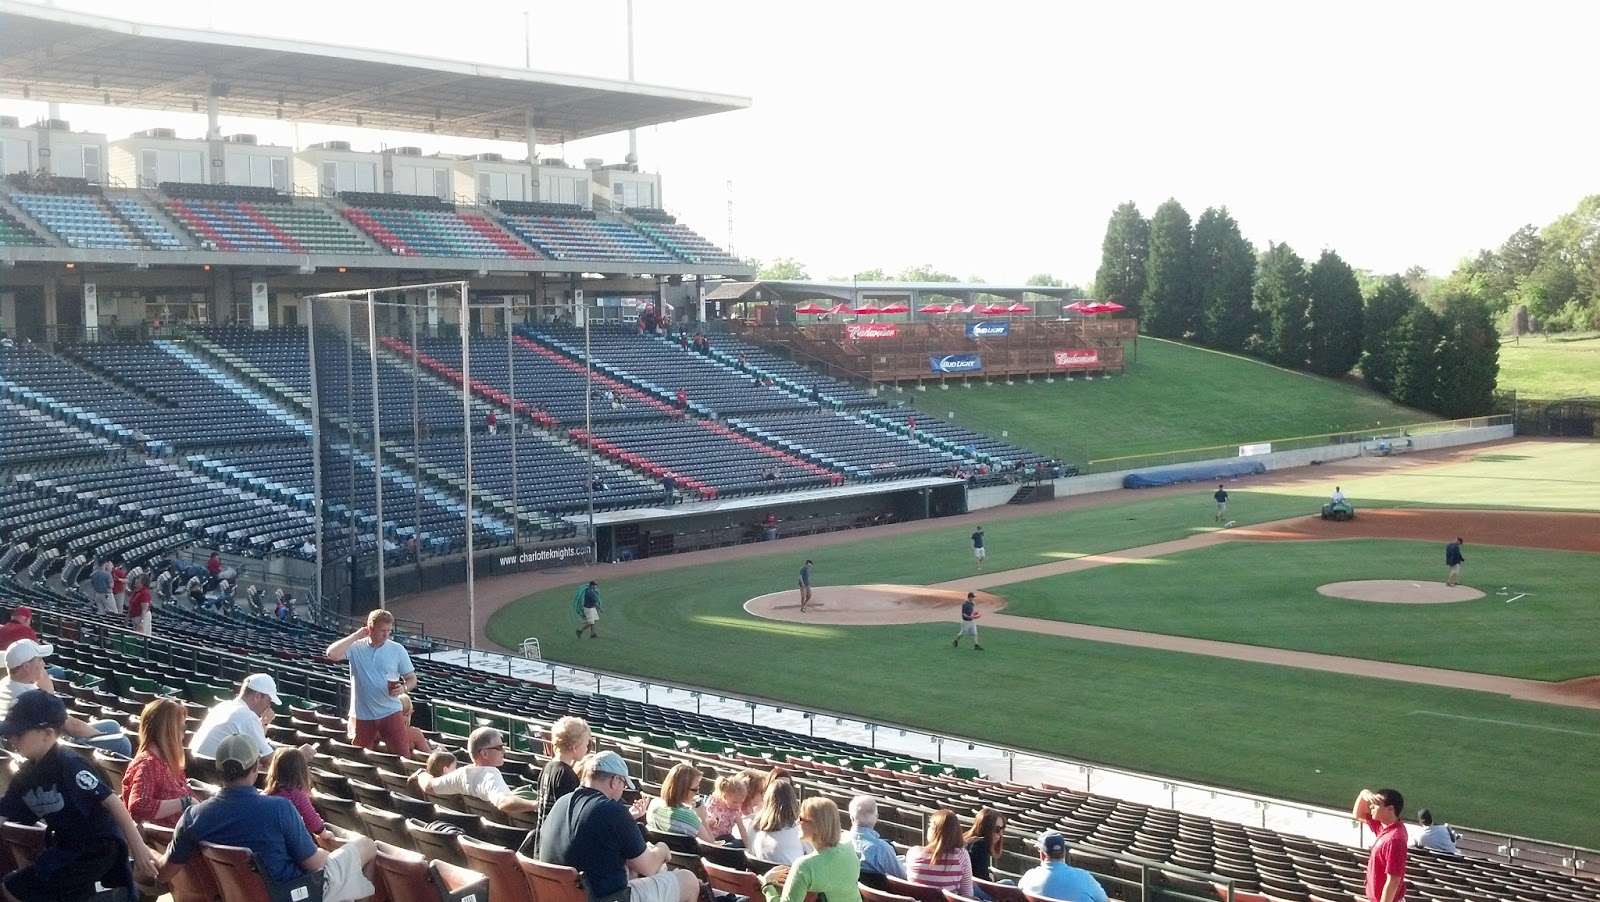 Knights Stadium - Ft. Mill South Carolina - Home of the Charlotte